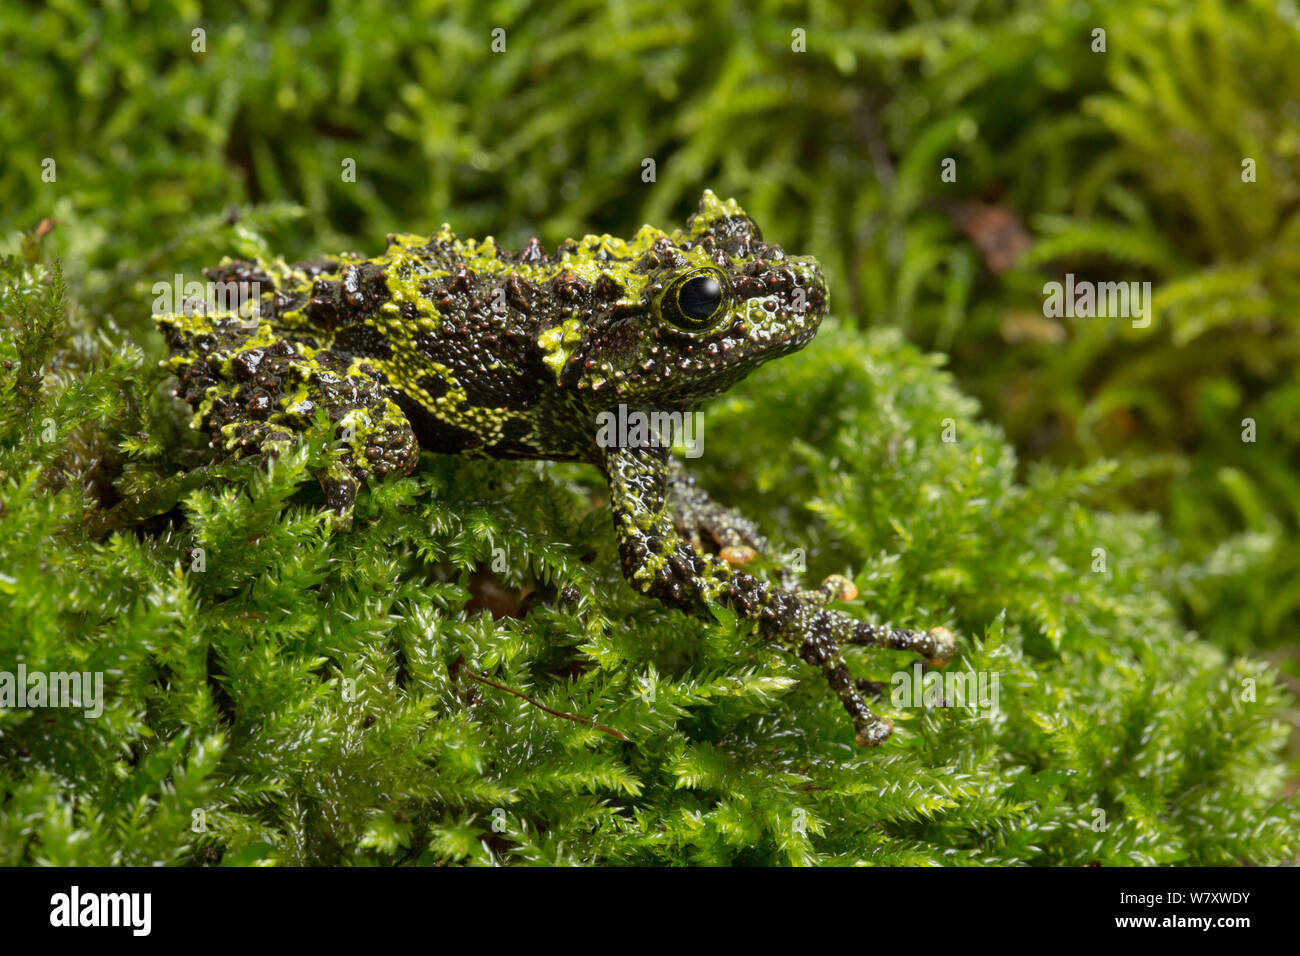 Two-coloured mossy frog / Chapa bug-eyed frog (Theloderma bicolor) Captive, endemic to Vietnam. Endangered species. Stock Photo